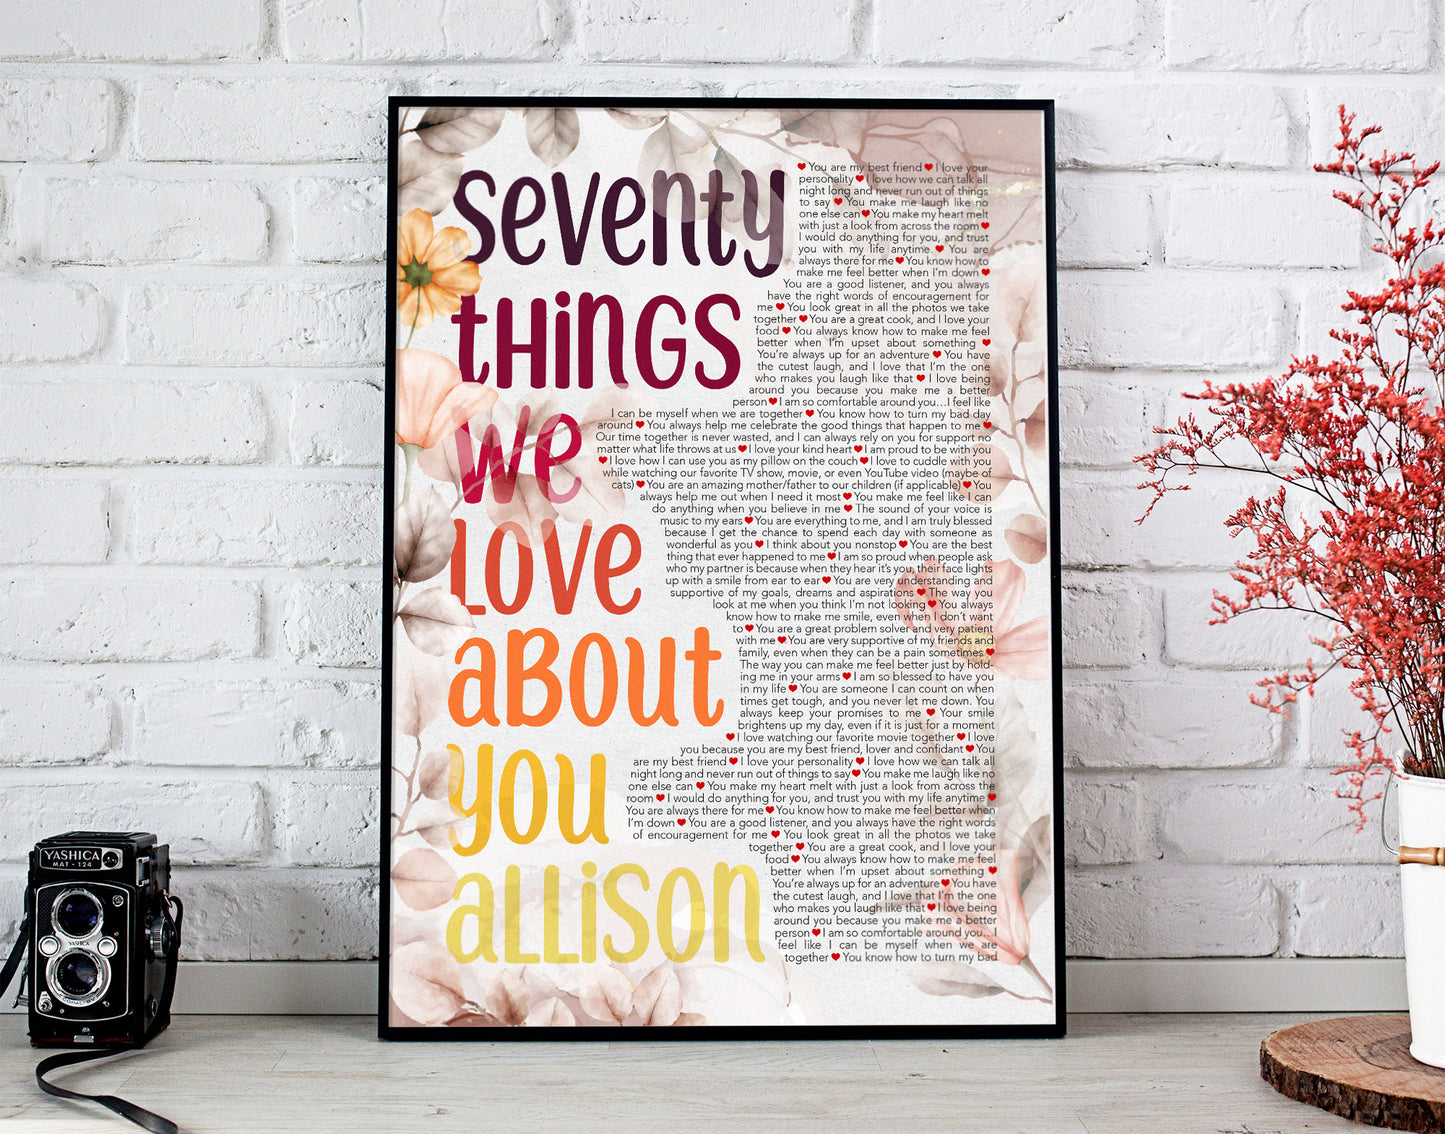 70th Birthday Gift - Seventy Things We Love About You - Personalized Name and Things Text